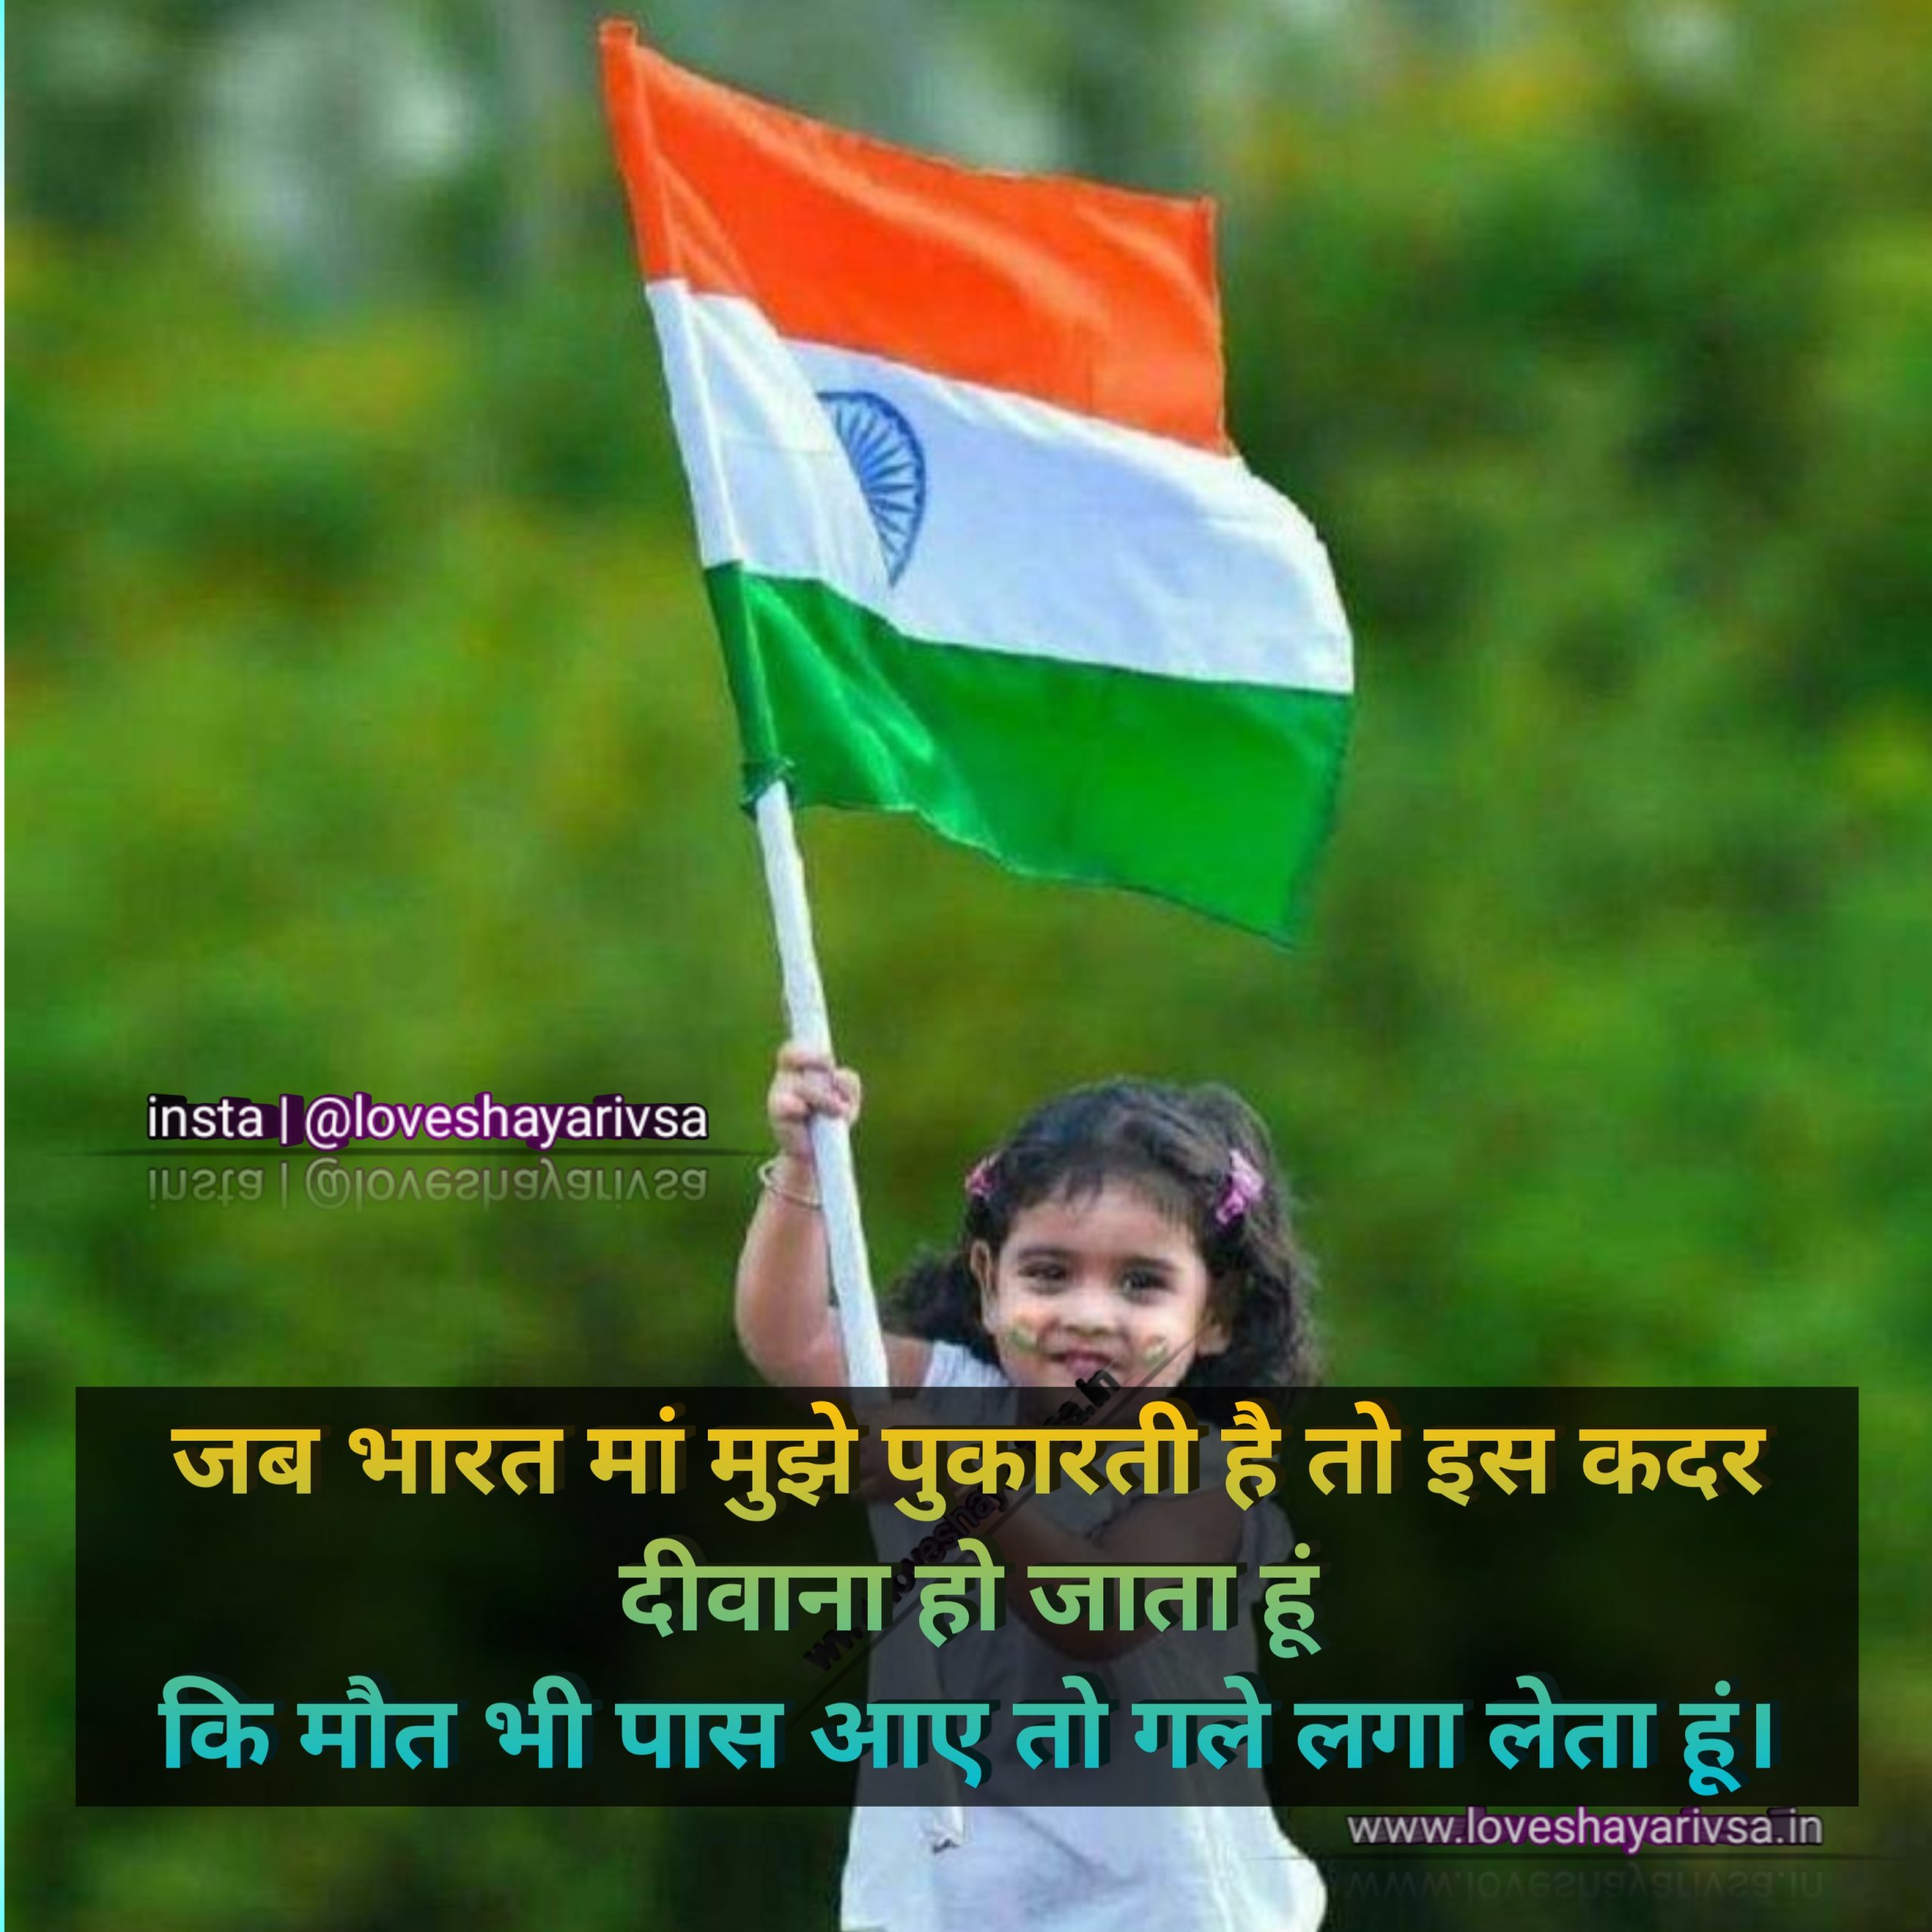 "A Young girl Wrapped in the Tricolor, Standing Tall as a Symbol of India's Bright Future and Aspirations on Independence Day ðŸ‡®ðŸ‡³âœ¨ #PatrioticYouth #FutureLeaders"